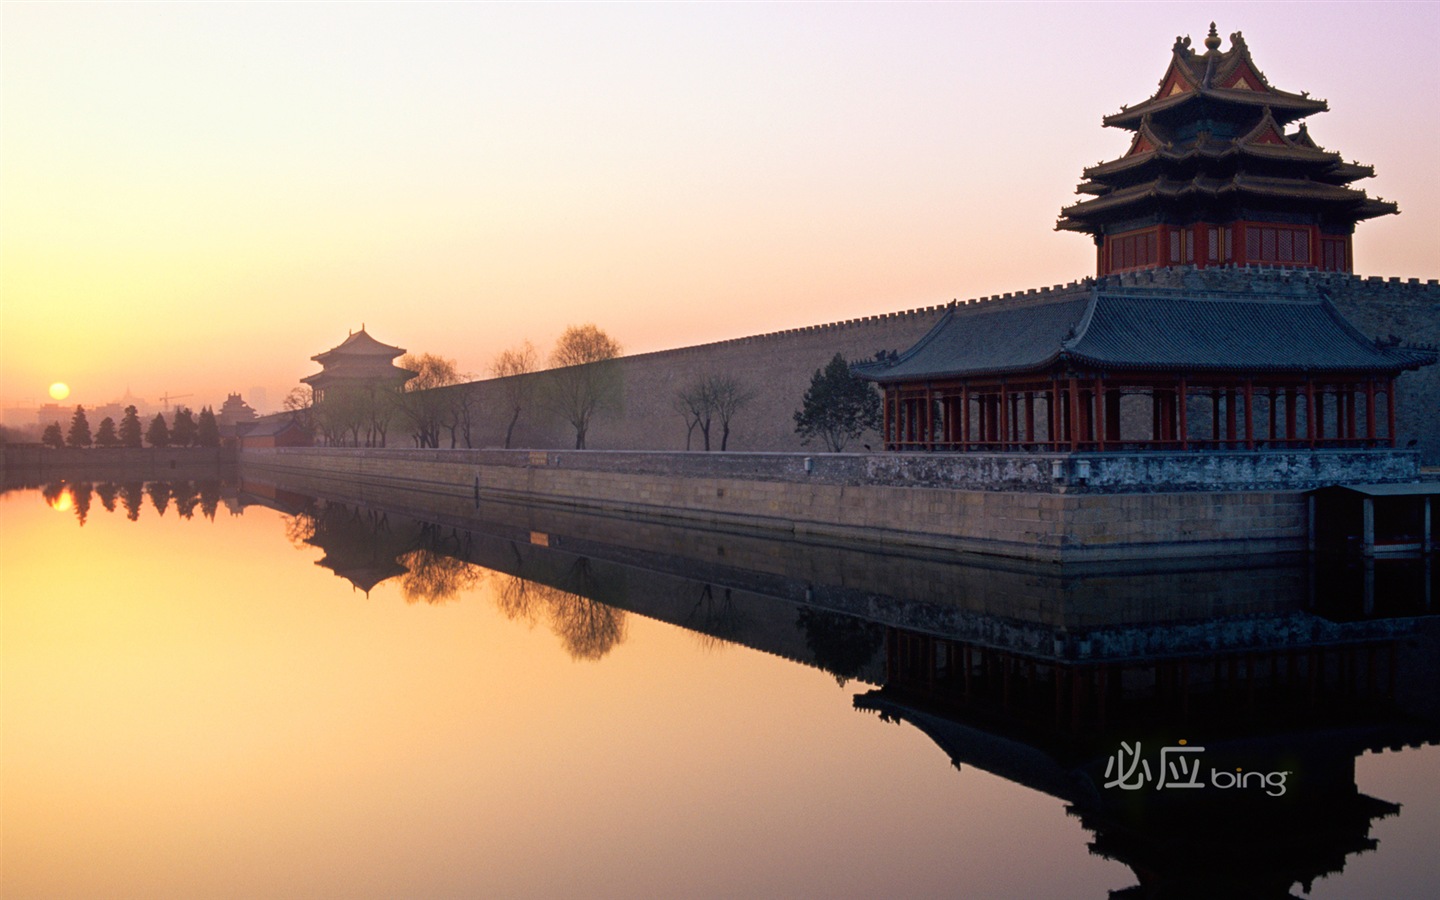 Bing selection best HD wallpapers: China theme wallpaper (2) #5 - 1440x900